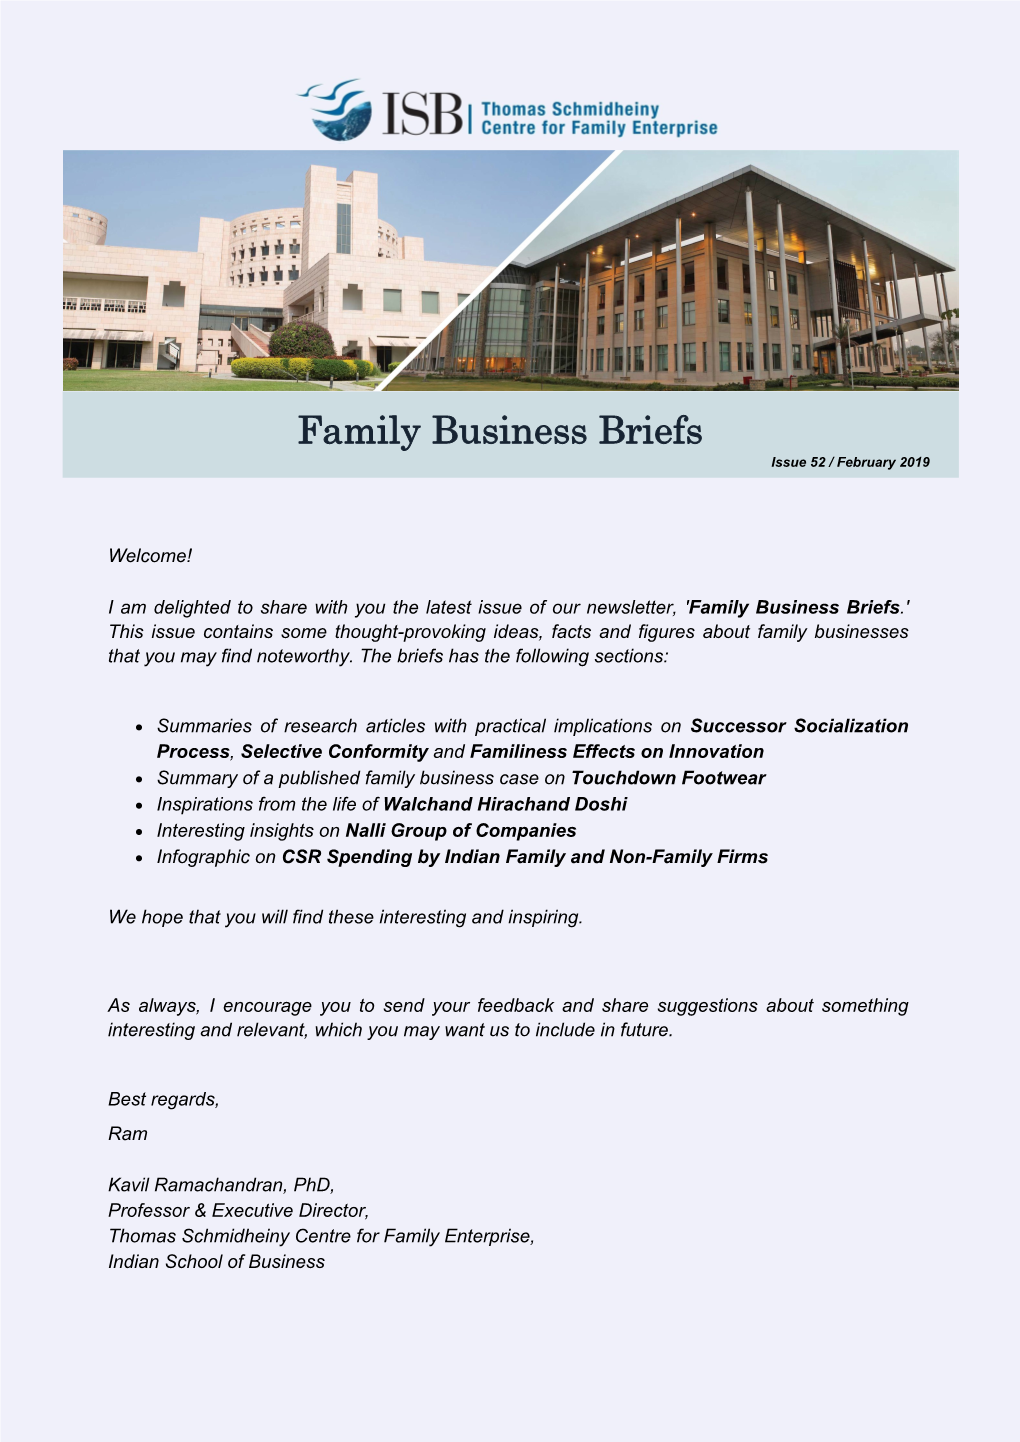 Family Business Briefs Issue 52 / February 2019